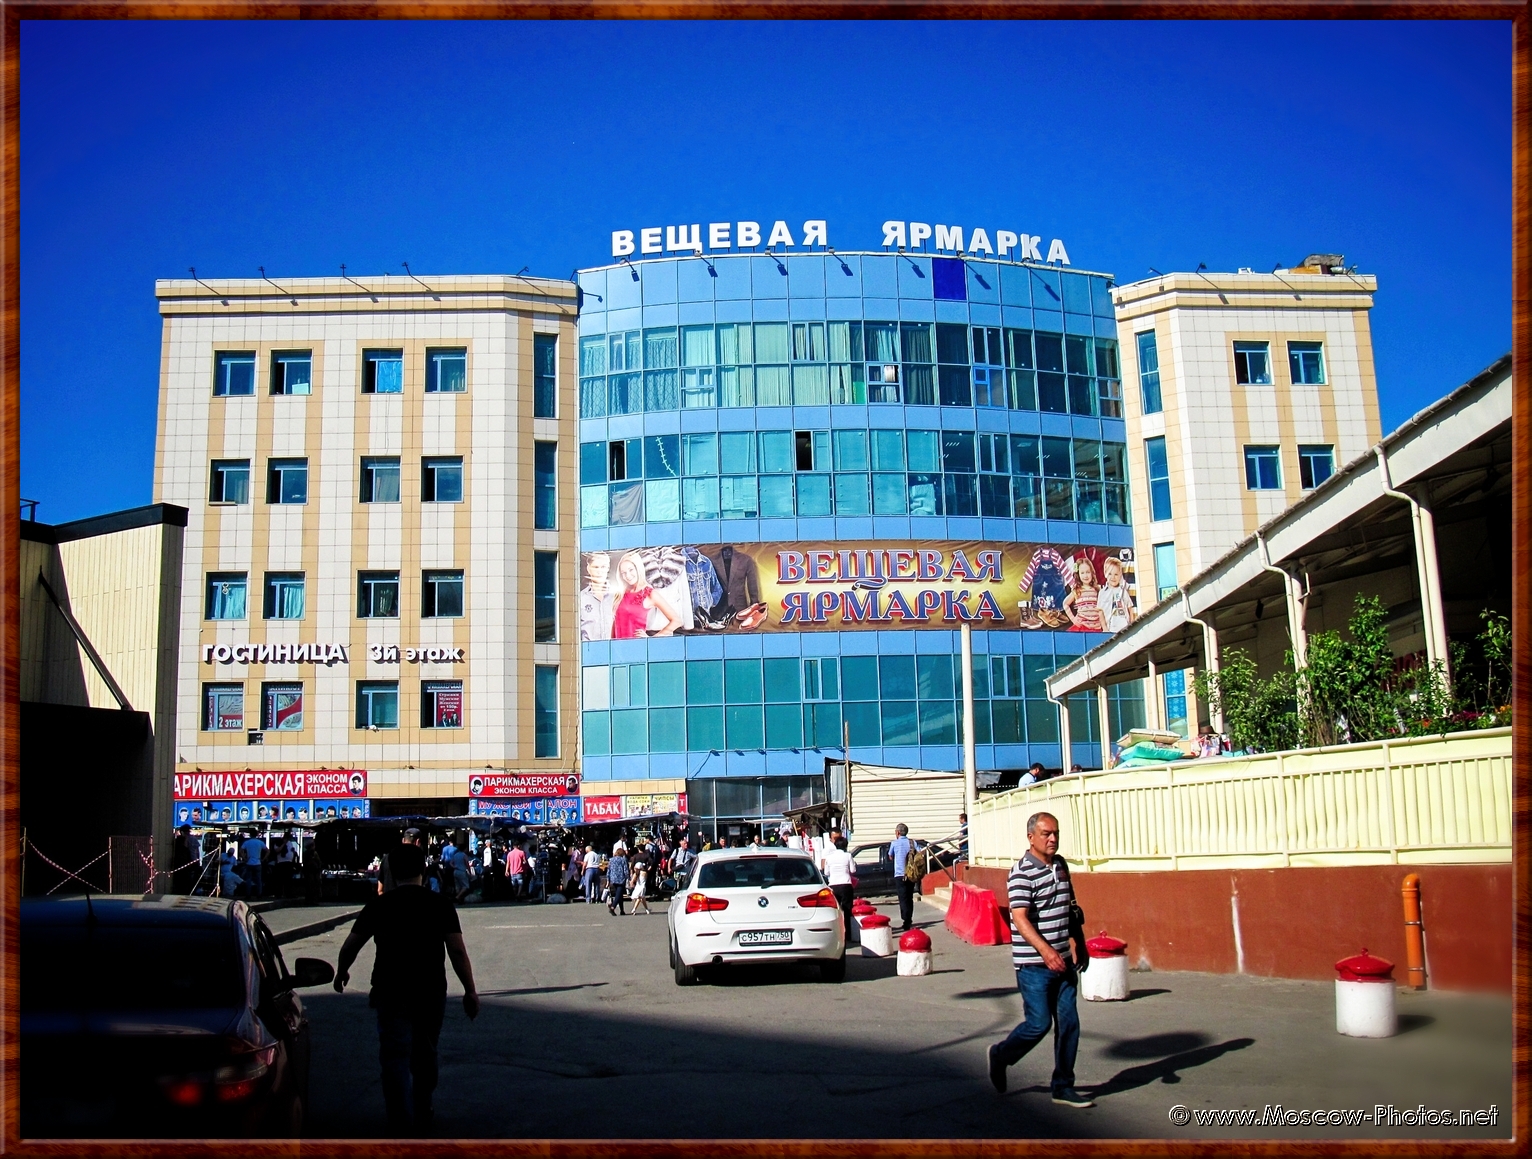 Clothing fair in Moscow, where there are always a lot of people